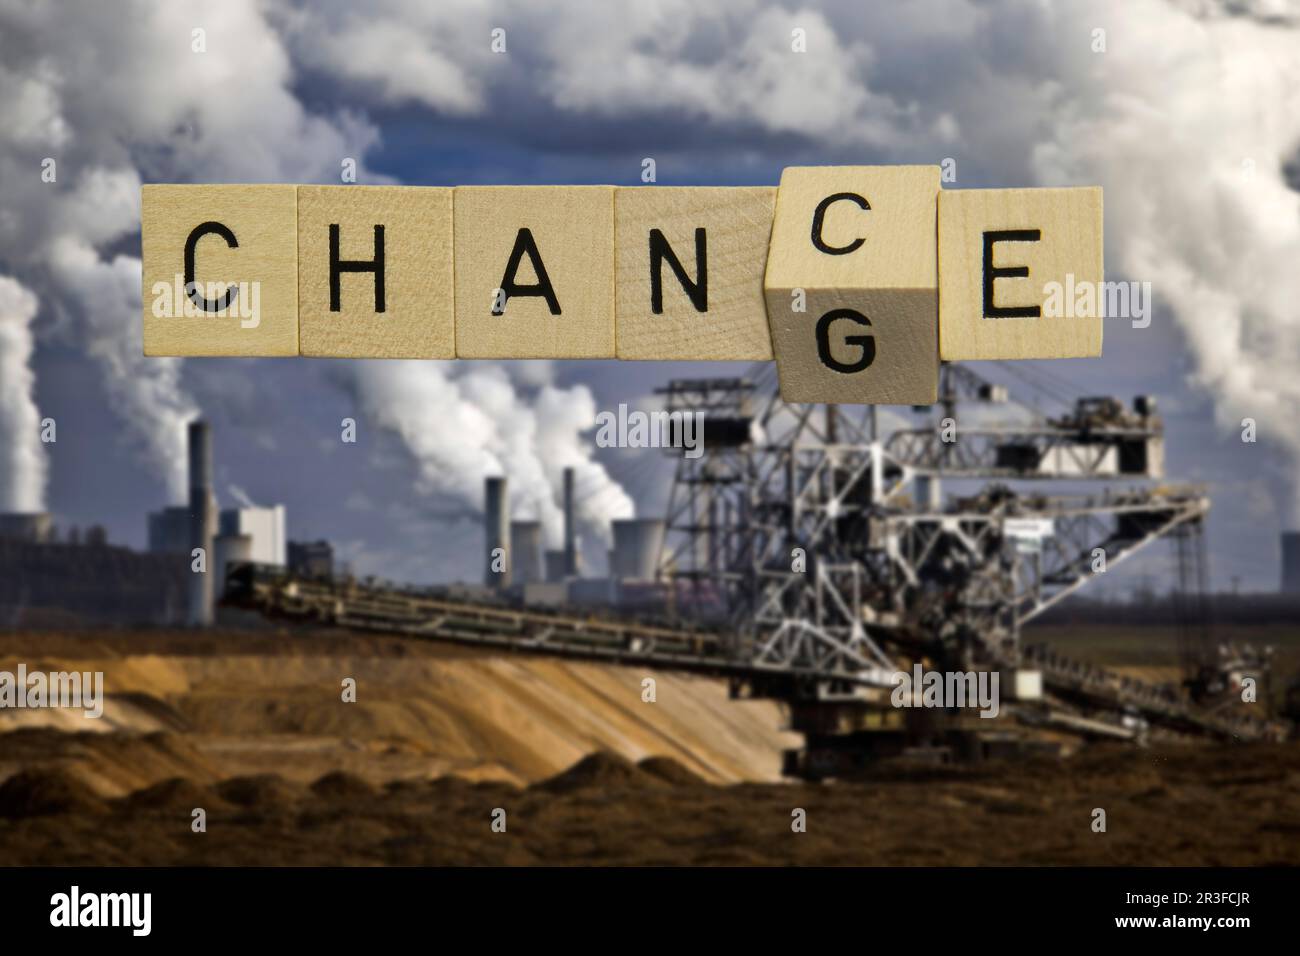 Chance or change, symbolic image, change in climate policy and the exit from brown coal mining Stock Photo